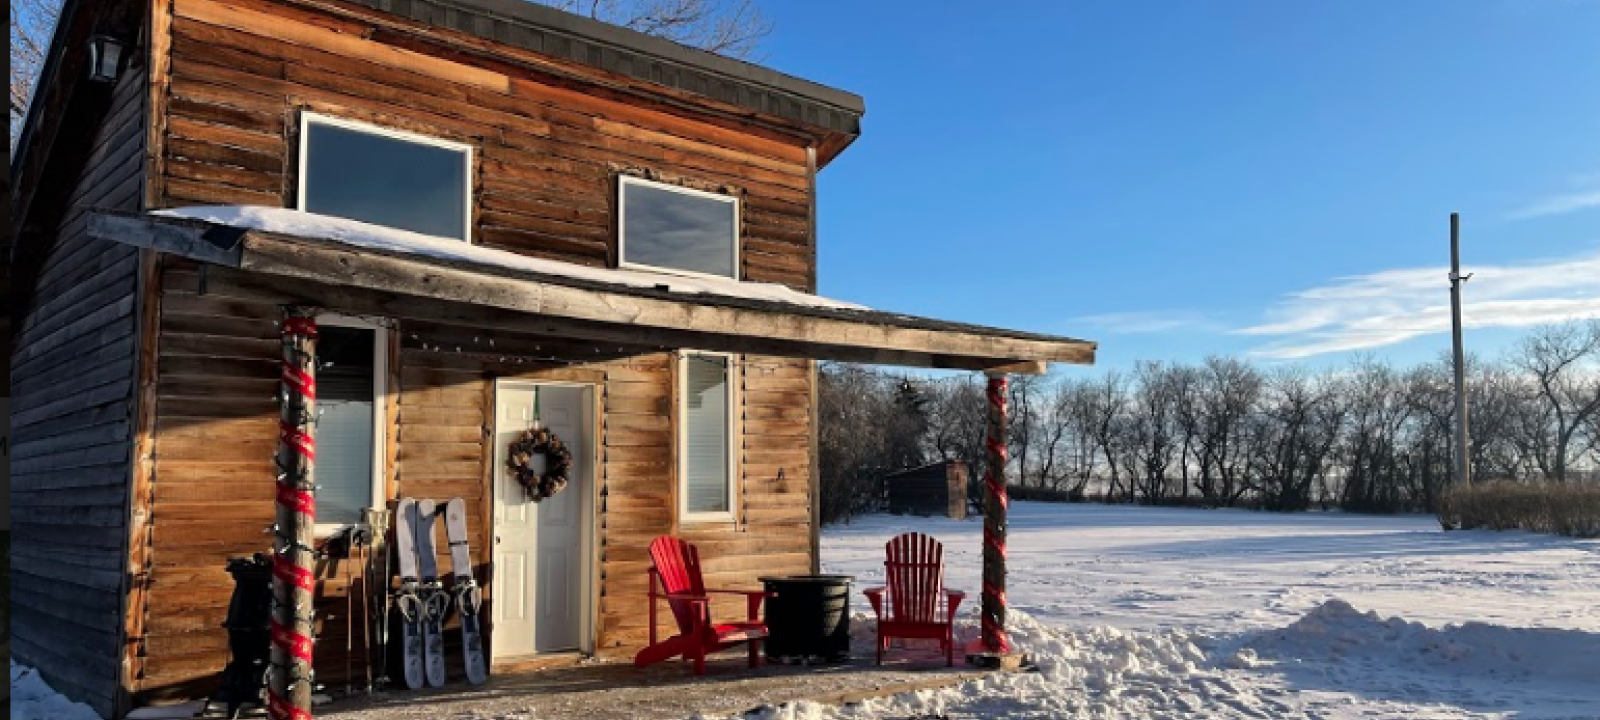 5 reasons to visit Champetre County in the winter